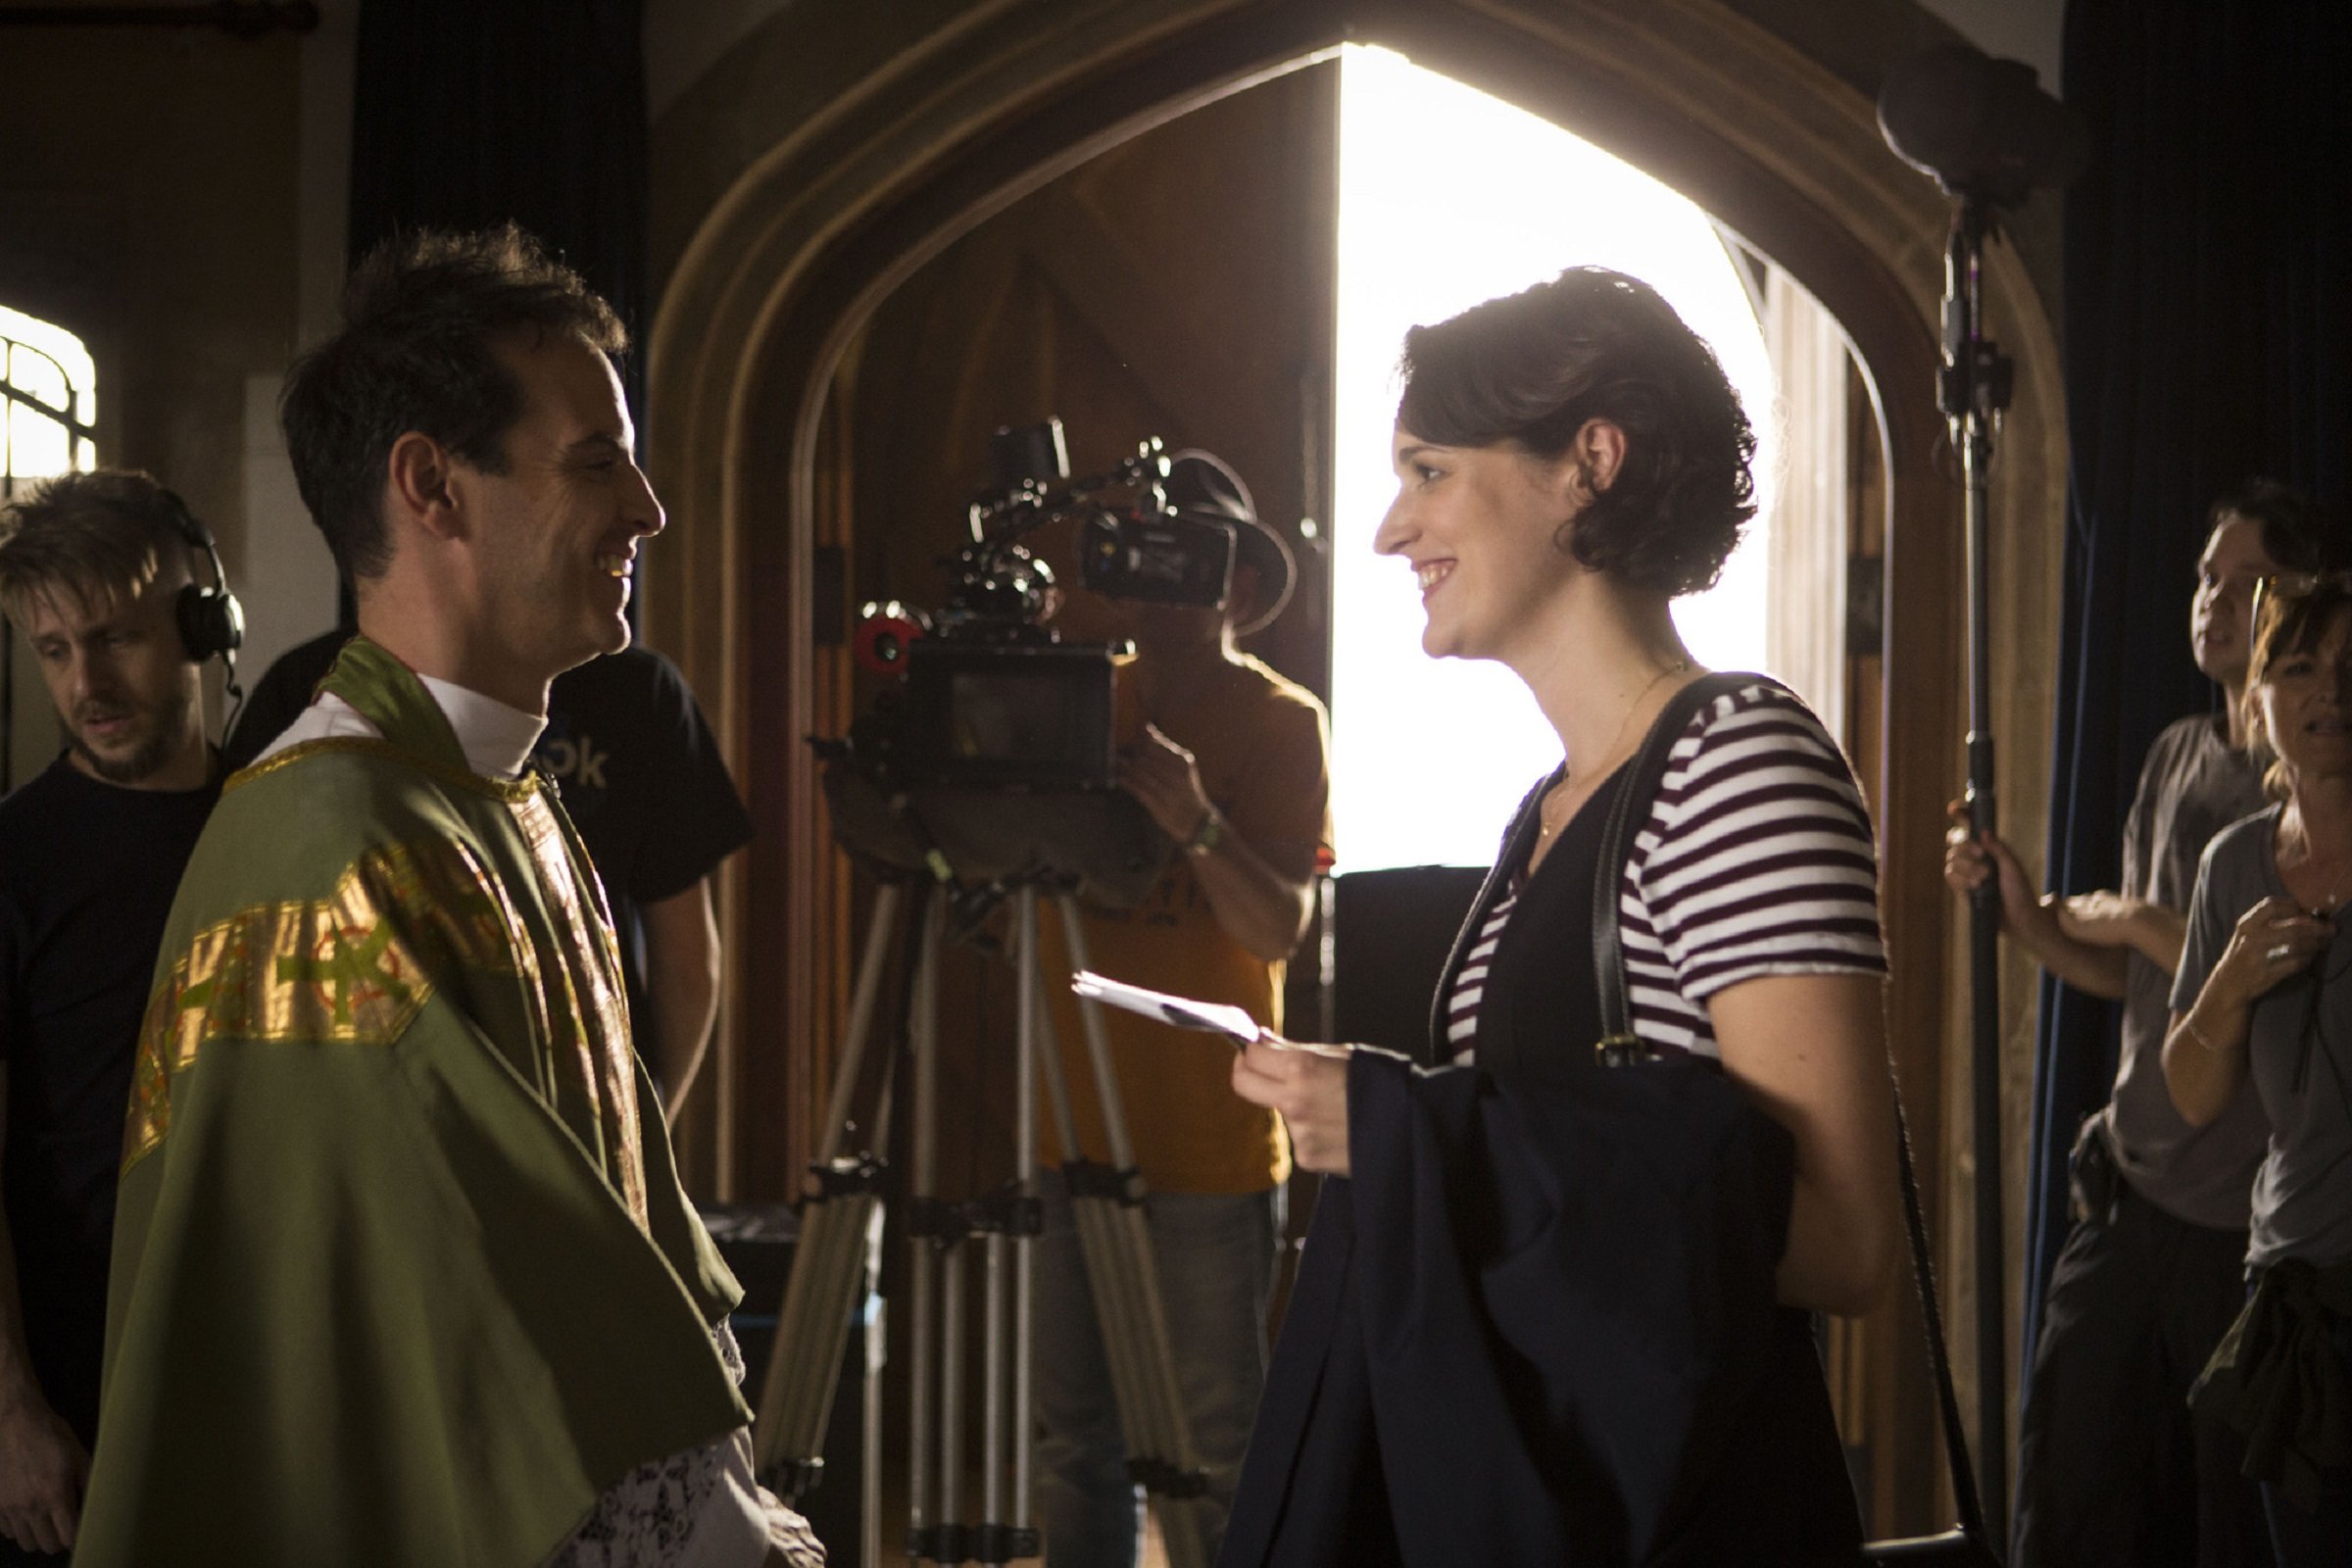 On Fleabag, frustration and resisting easy answers